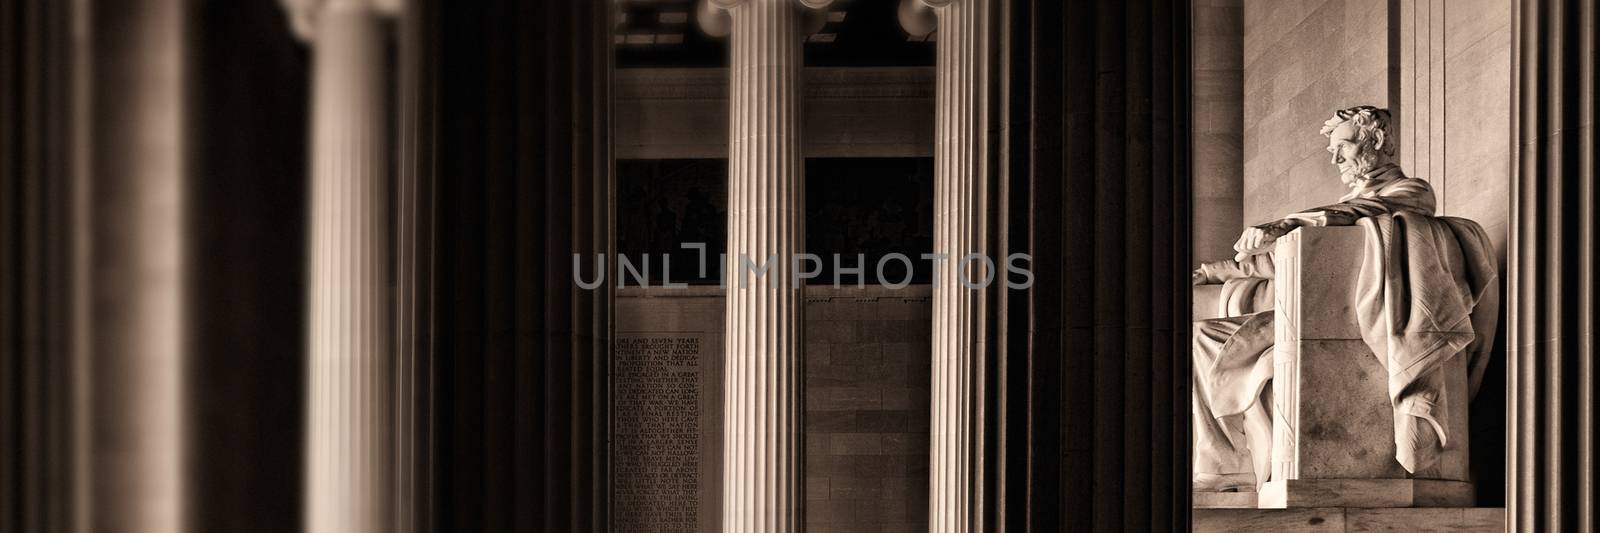 The Lincoln memorial by CelsoDiniz